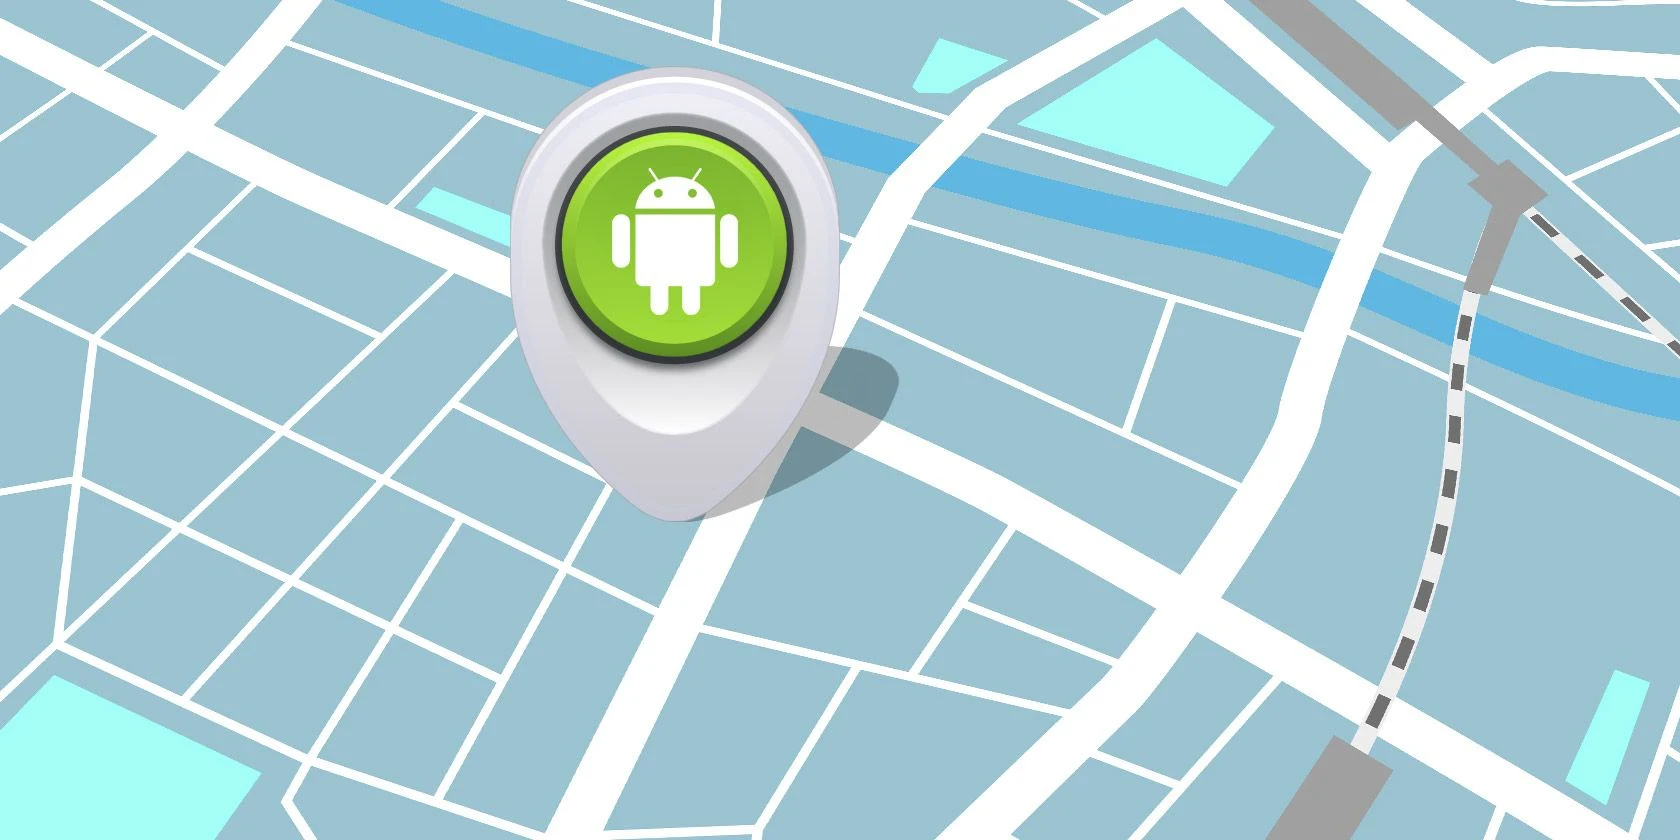 How to Trace and Find Your Phone's Location